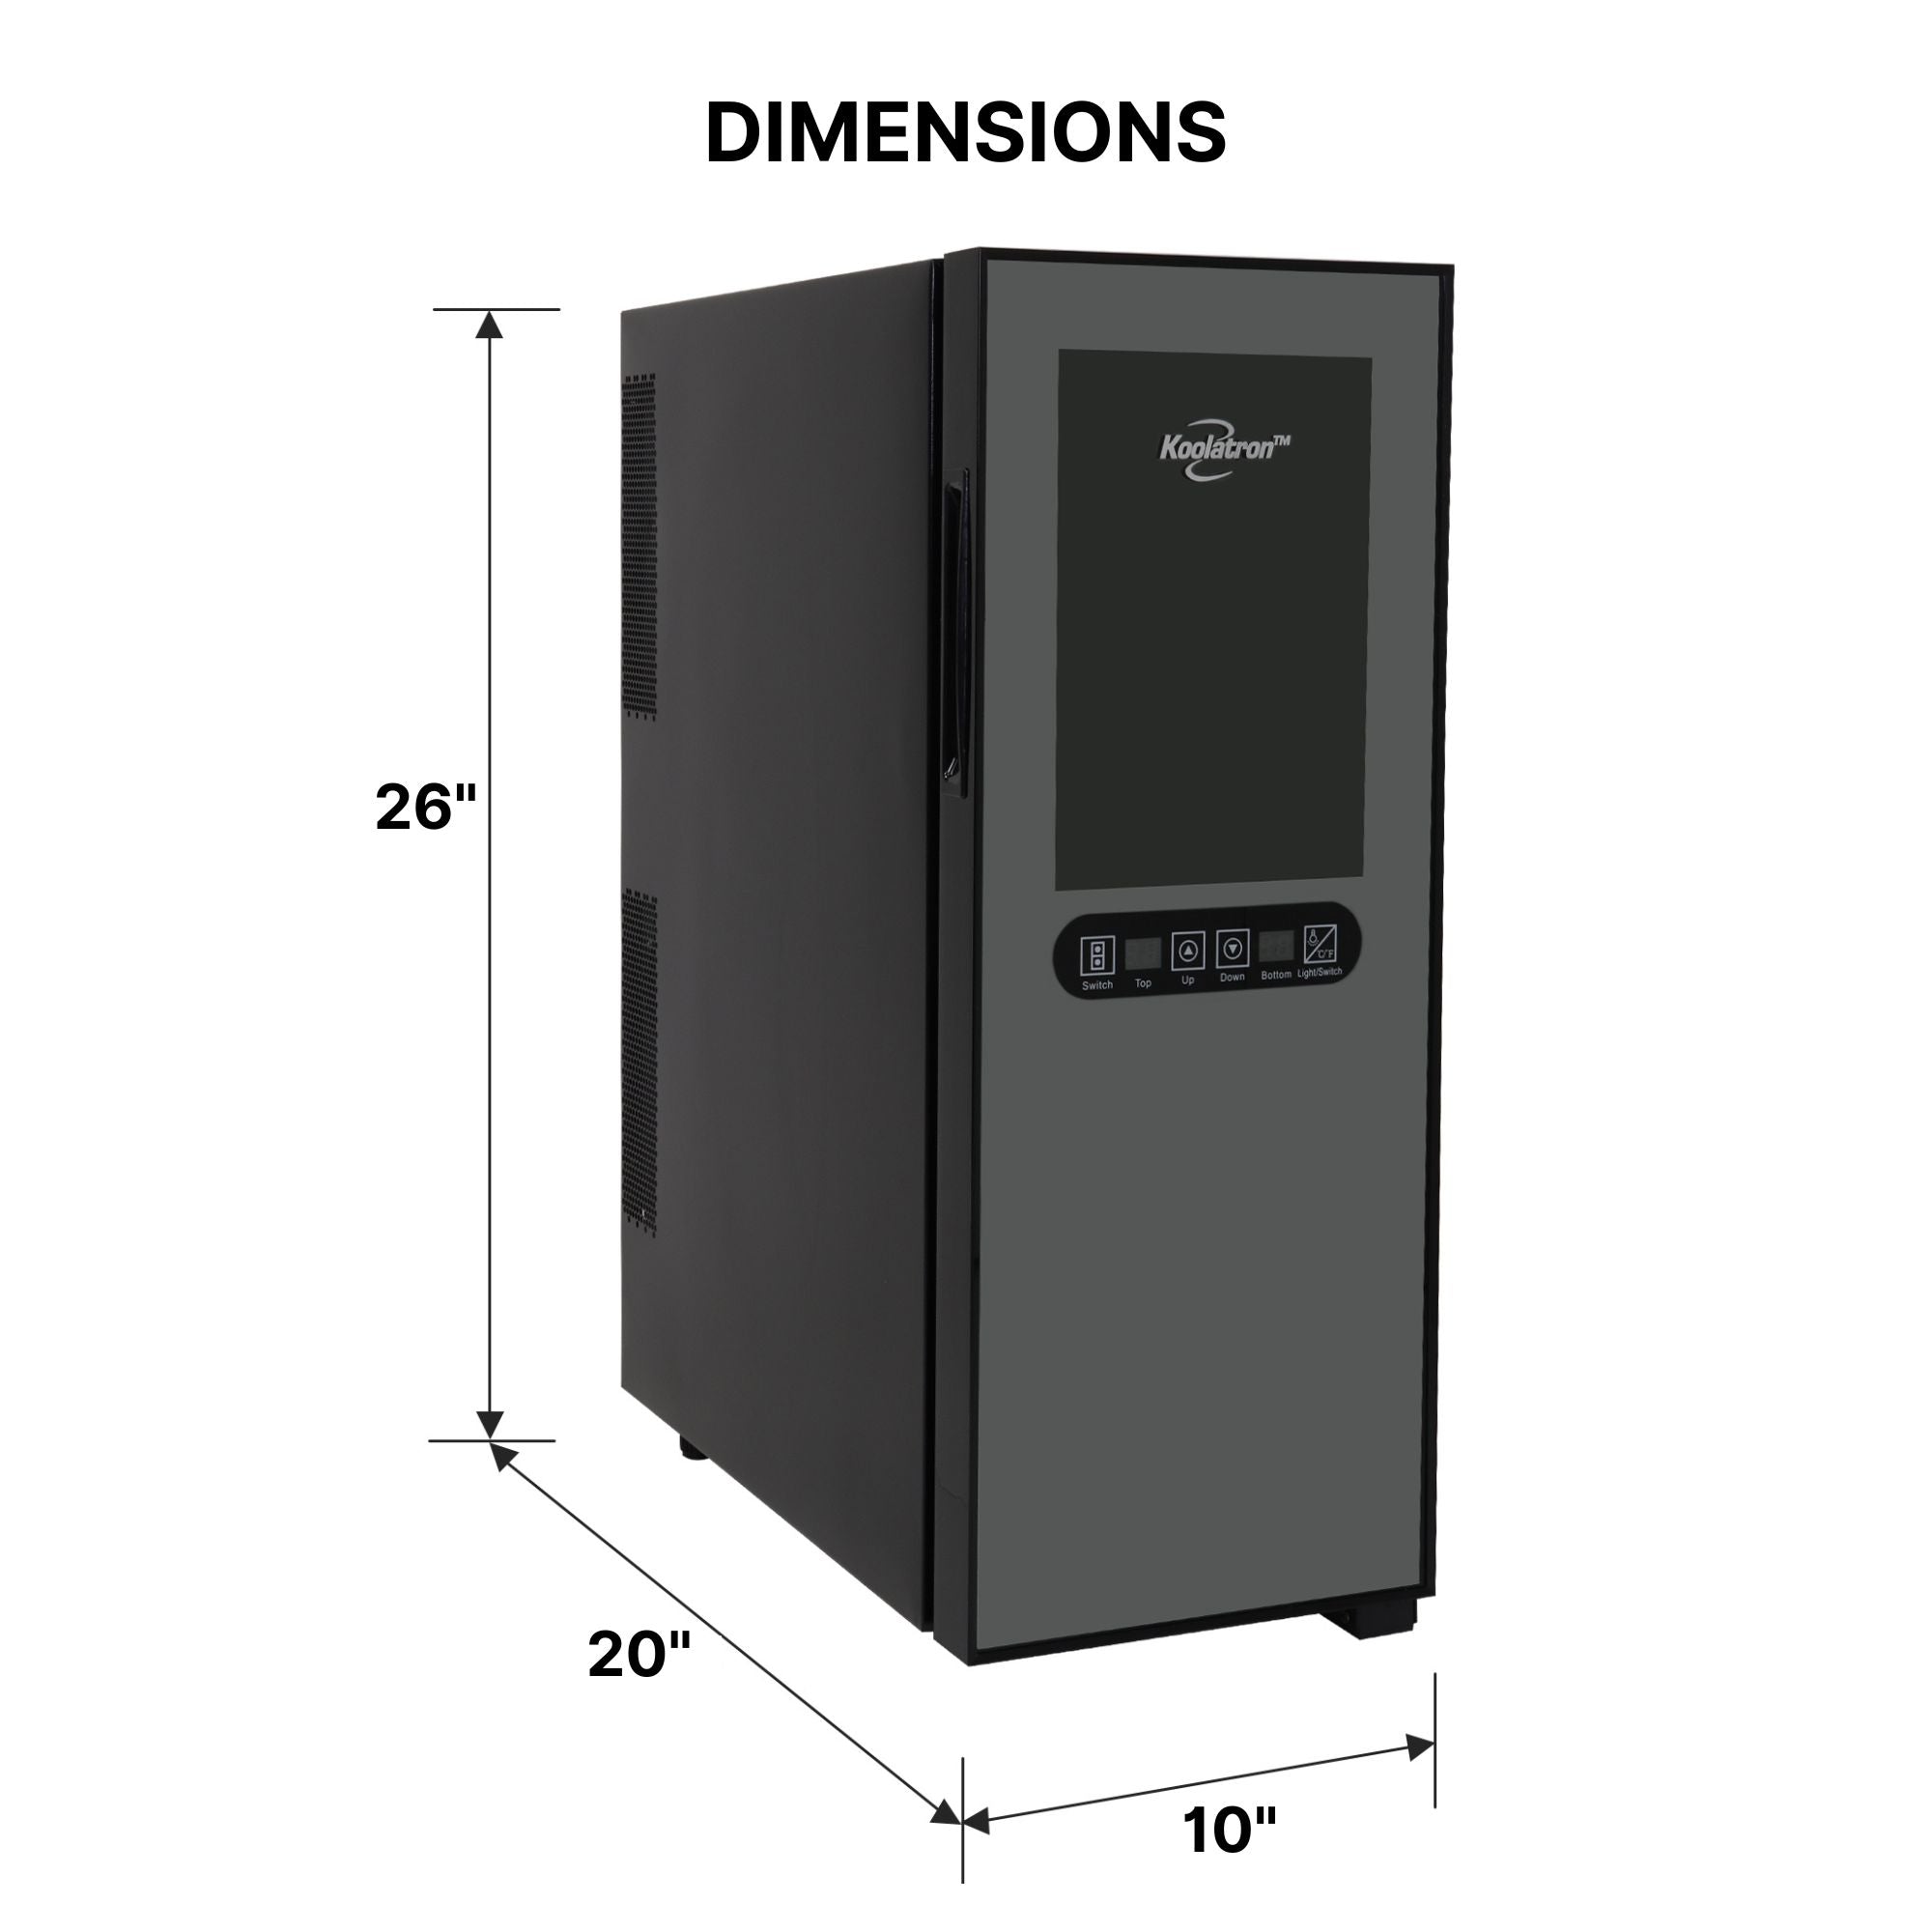 Koolatron 12 bottle dual zone thermoelectric wine fridge on a white background with dimensions labeled